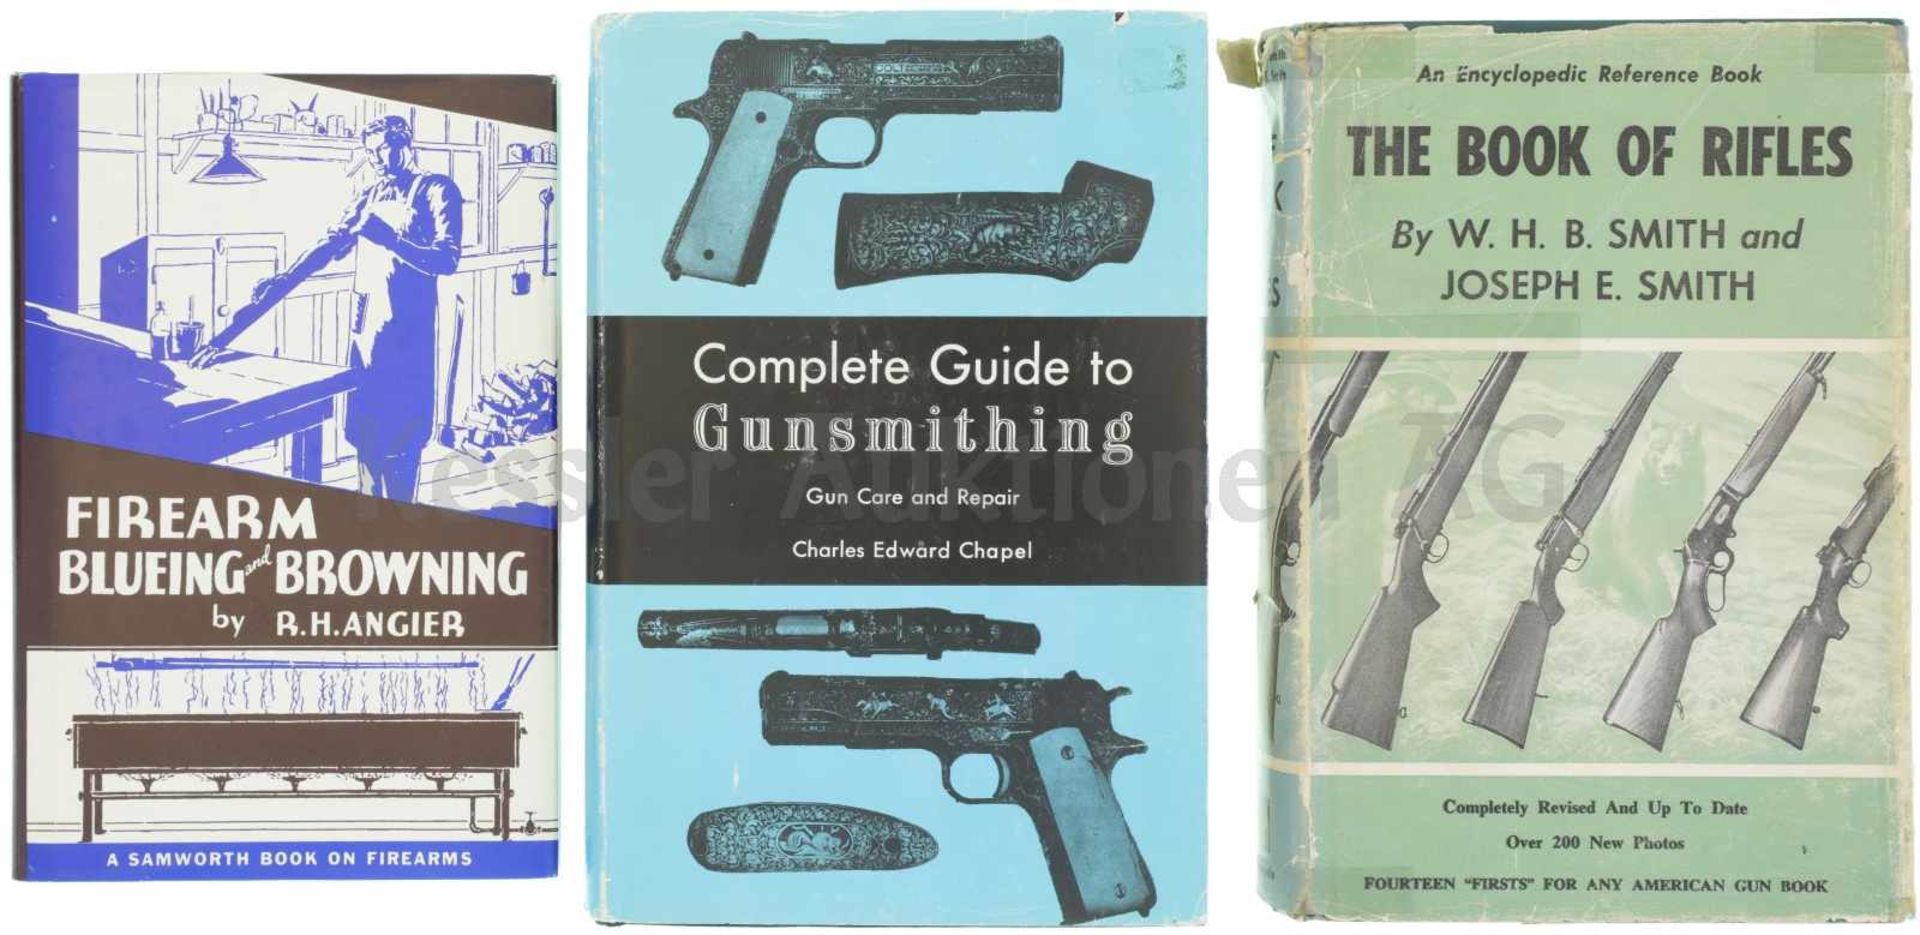 Konvolut von 3 Büchern 1. Firearm Blueing and Browning, by R.H. Angier, 2. Complete Guide to